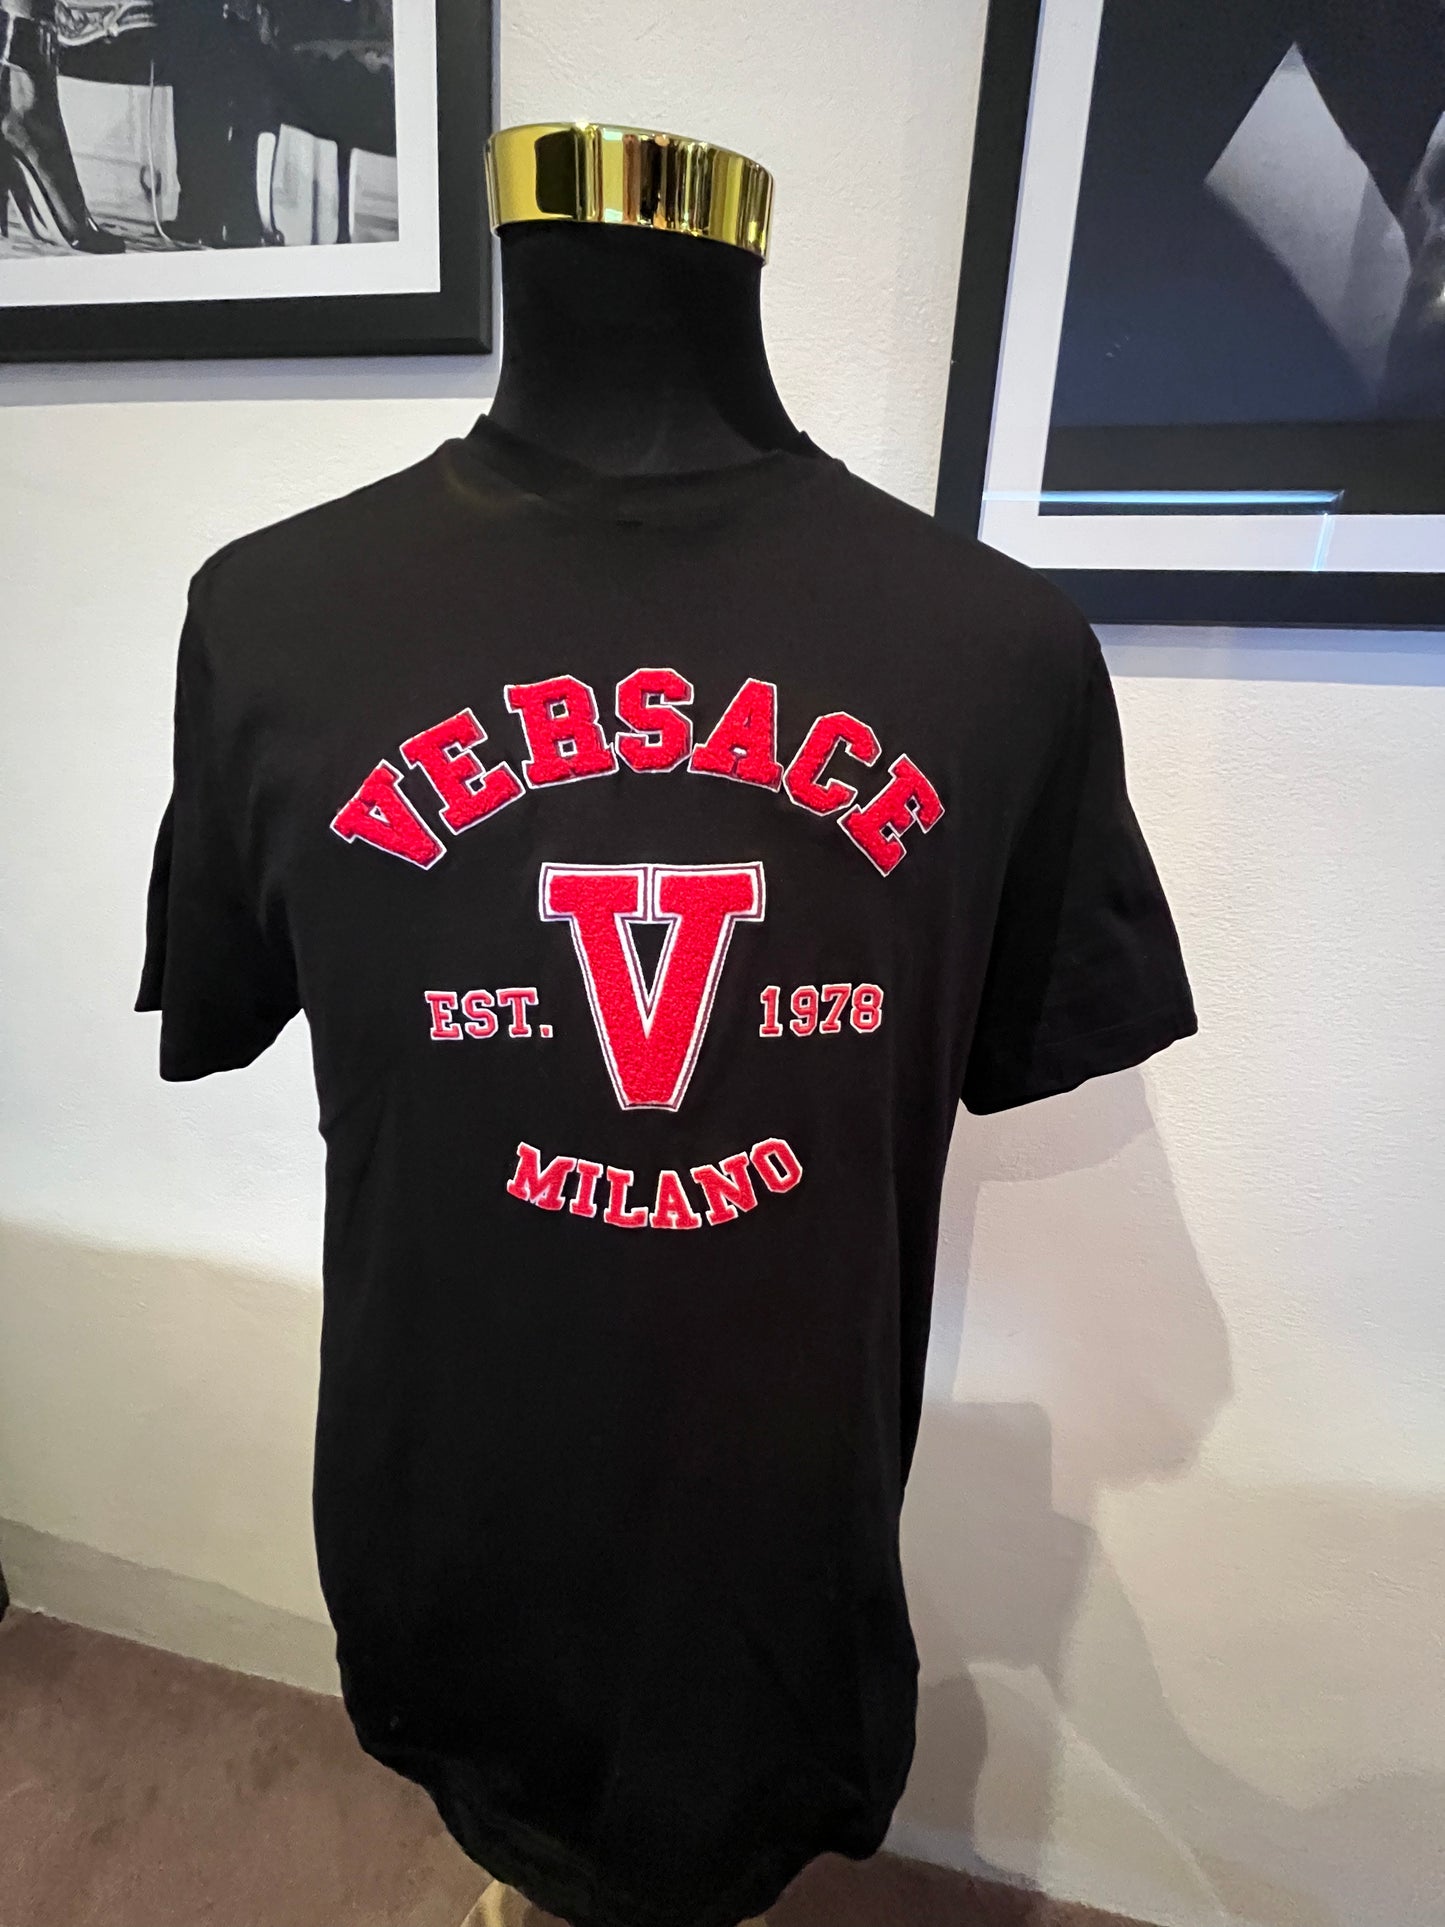 Versace 100% Cotton Black Tee Red Embroidered Logo Size XL Made in Italy